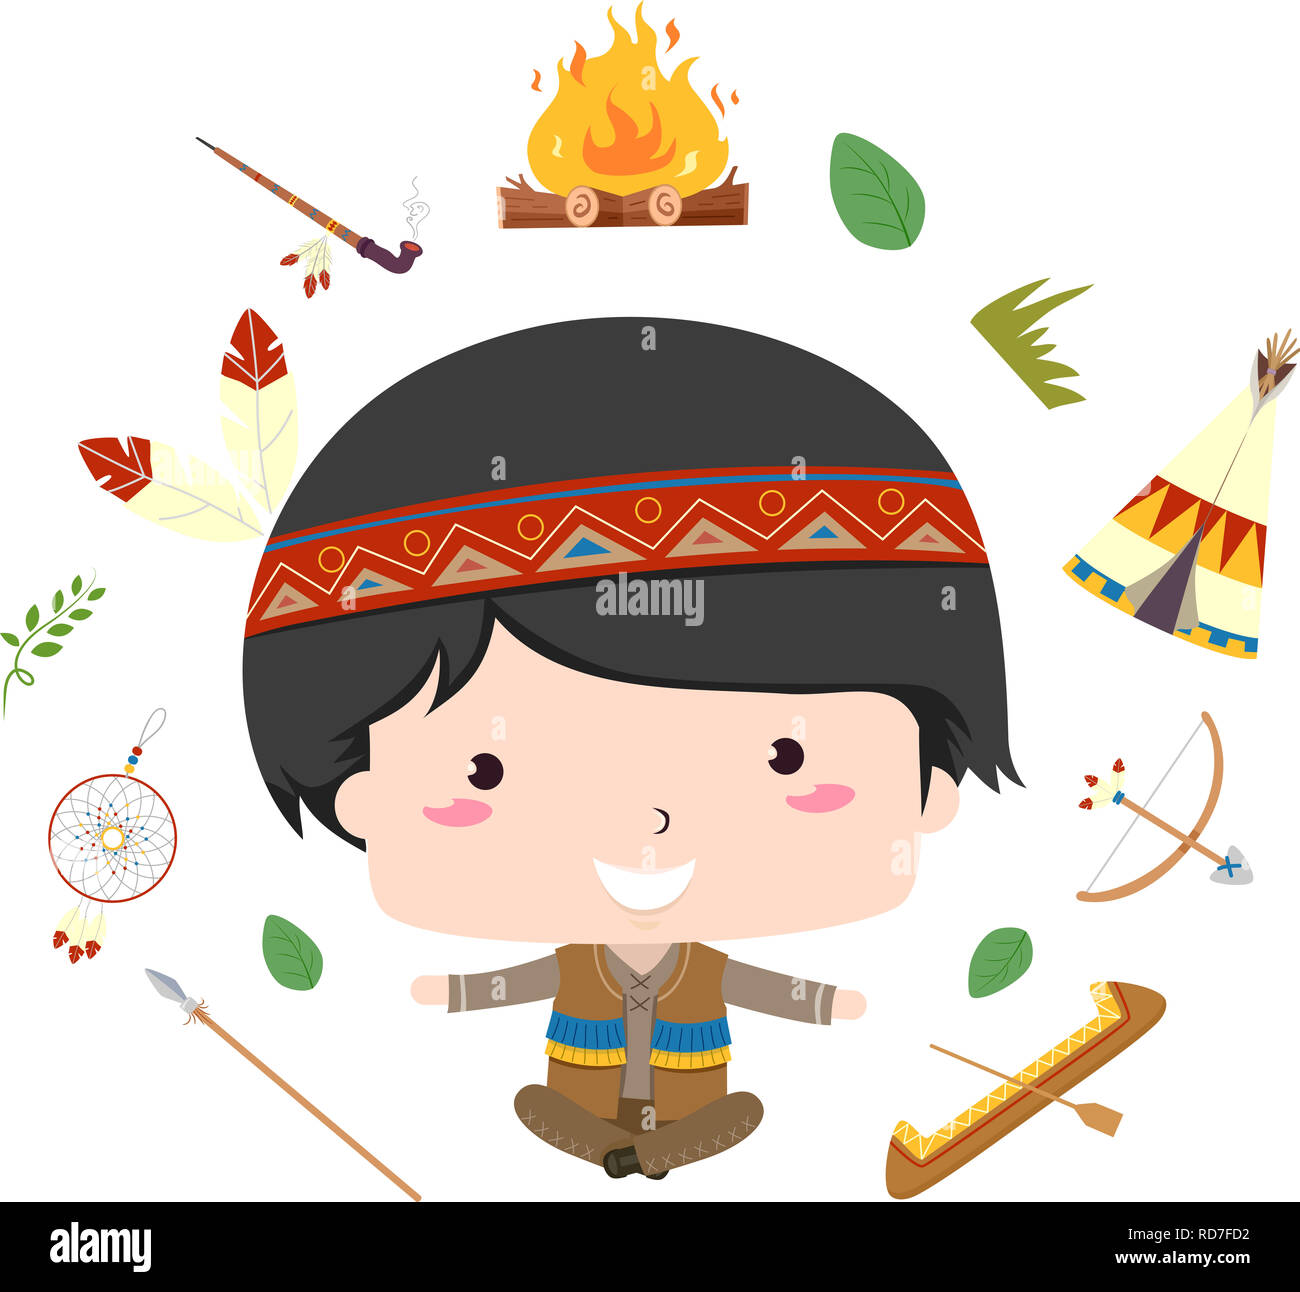 Illustration of a Native American Kid Boy Showing Different Elements from Bonfire, Pipe, Tipi, Spear, Canoe, Bow and Arrow Stock Photo